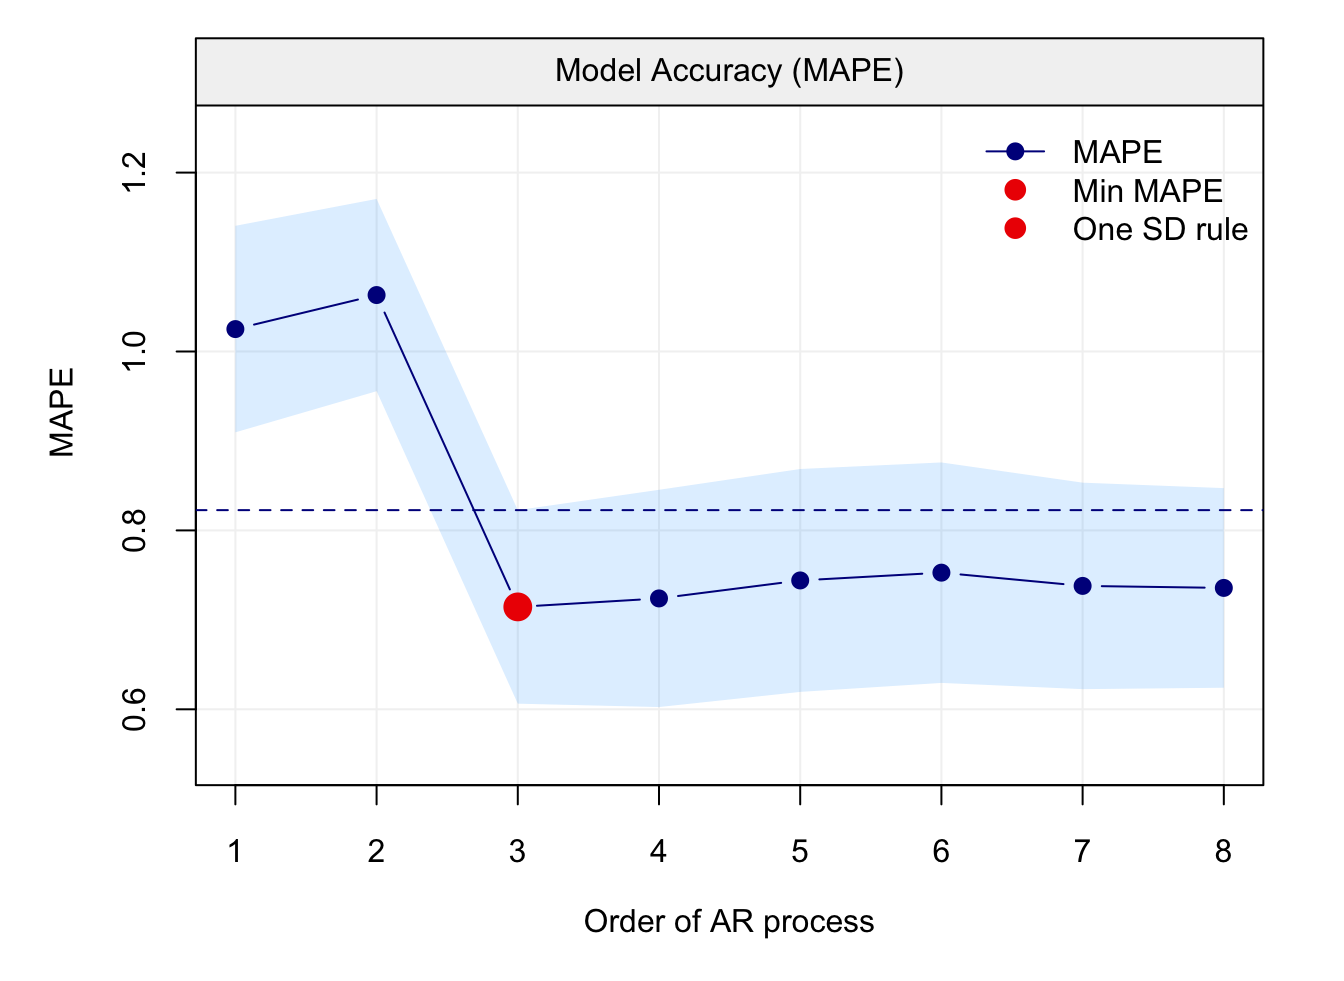 Estimated MAPE for the candidate models included in an AR(8) model. The true underlying model is an AR(3).